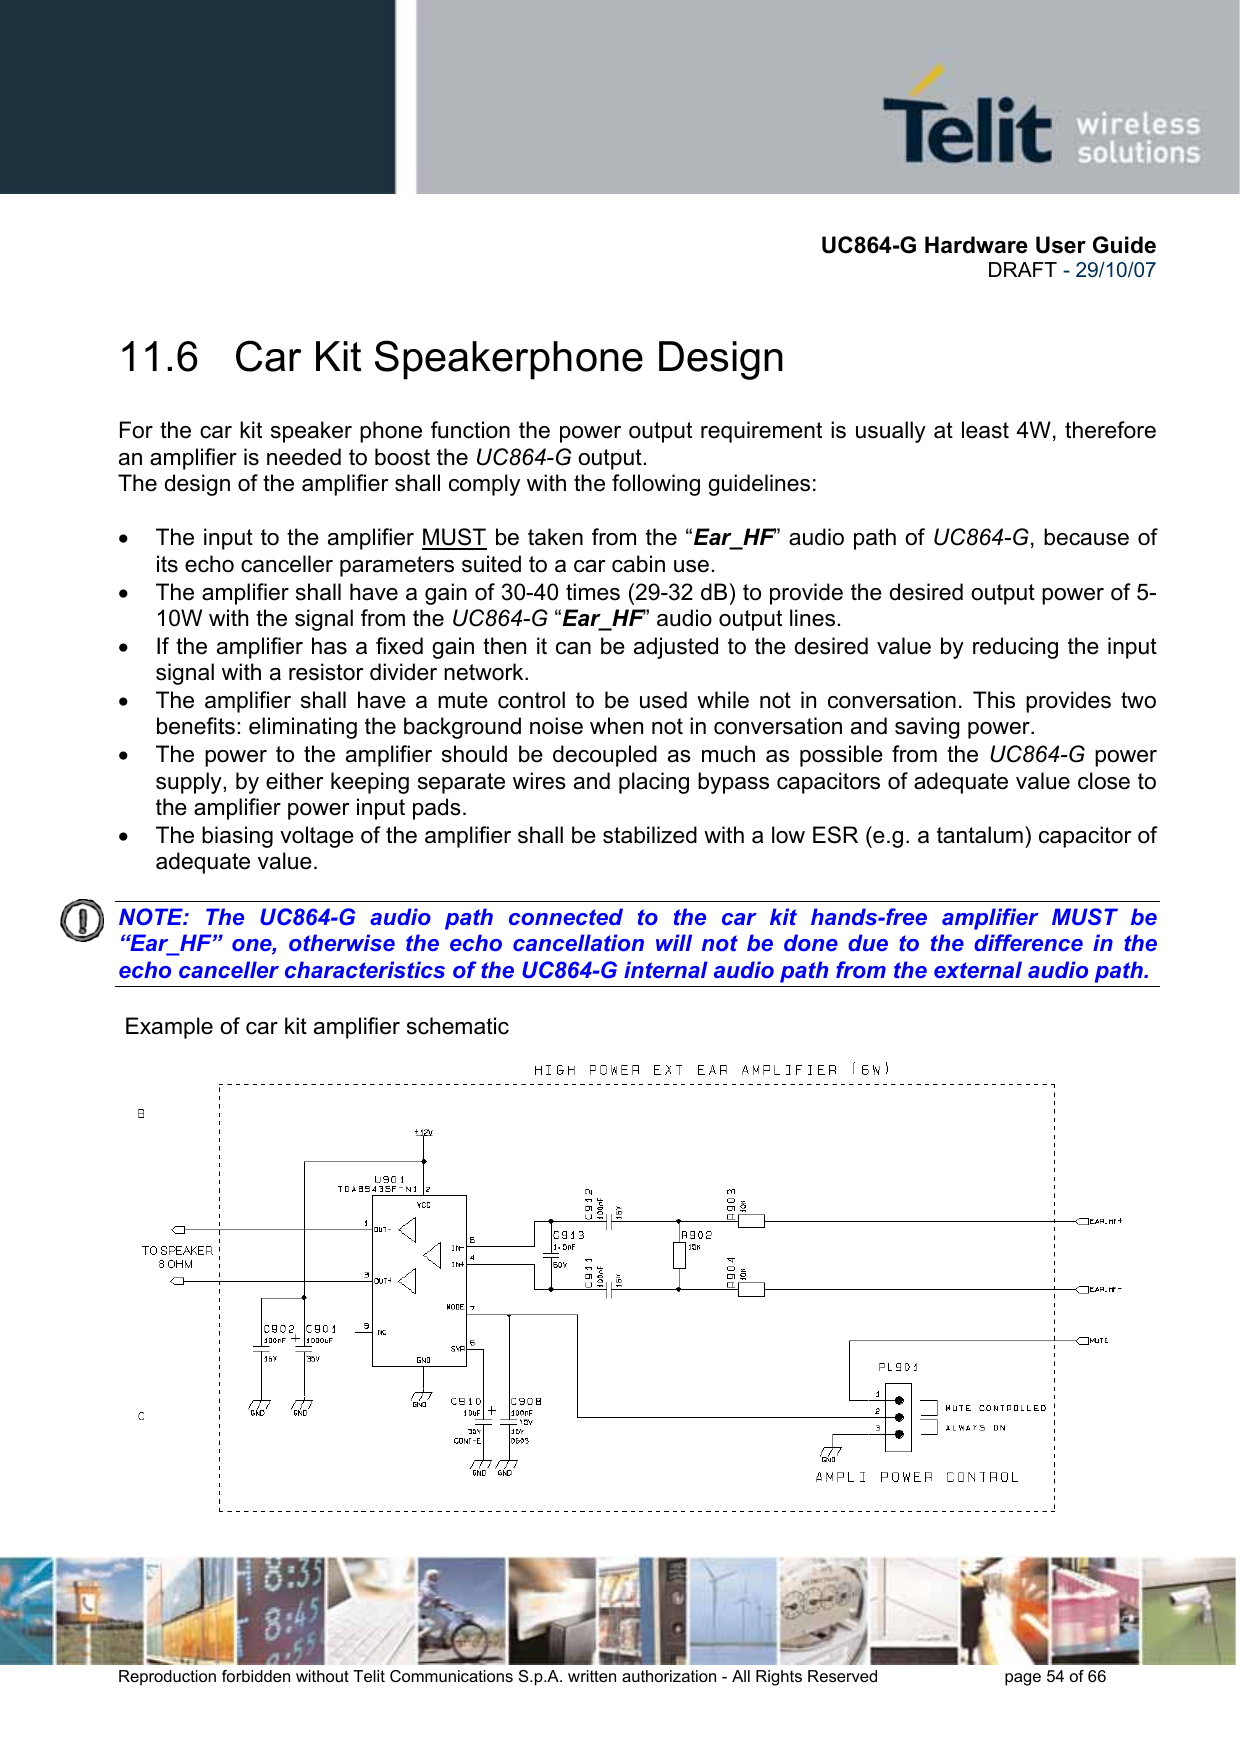       UC864-G Hardware User Guide  DRAFT - 29/10/07      Reproduction forbidden without Telit Communications S.p.A. written authorization - All Rights Reserved    page 54 of 66  11.6   Car Kit Speakerphone Design For the car kit speaker phone function the power output requirement is usually at least 4W, therefore an amplifier is needed to boost the UC864-G output. The design of the amplifier shall comply with the following guidelines:  •  The input to the amplifier MUST be taken from the “Ear_HF” audio path of UC864-G, because of its echo canceller parameters suited to a car cabin use. •  The amplifier shall have a gain of 30-40 times (29-32 dB) to provide the desired output power of 5-10W with the signal from the UC864-G “Ear_HF” audio output lines. •  If the amplifier has a fixed gain then it can be adjusted to the desired value by reducing the input signal with a resistor divider network. •  The amplifier shall have a mute control to be used while not in conversation. This provides two benefits: eliminating the background noise when not in conversation and saving power. •  The power to the amplifier should be decoupled as much as possible from the UC864-G power supply, by either keeping separate wires and placing bypass capacitors of adequate value close to the amplifier power input pads. •  The biasing voltage of the amplifier shall be stabilized with a low ESR (e.g. a tantalum) capacitor of adequate value.  NOTE: The UC864-G audio path connected to the car kit hands-free amplifier MUST be “Ear_HF” one, otherwise the echo cancellation will not be done due to the difference in the echo canceller characteristics of the UC864-G internal audio path from the external audio path.     Example of car kit amplifier schematic 